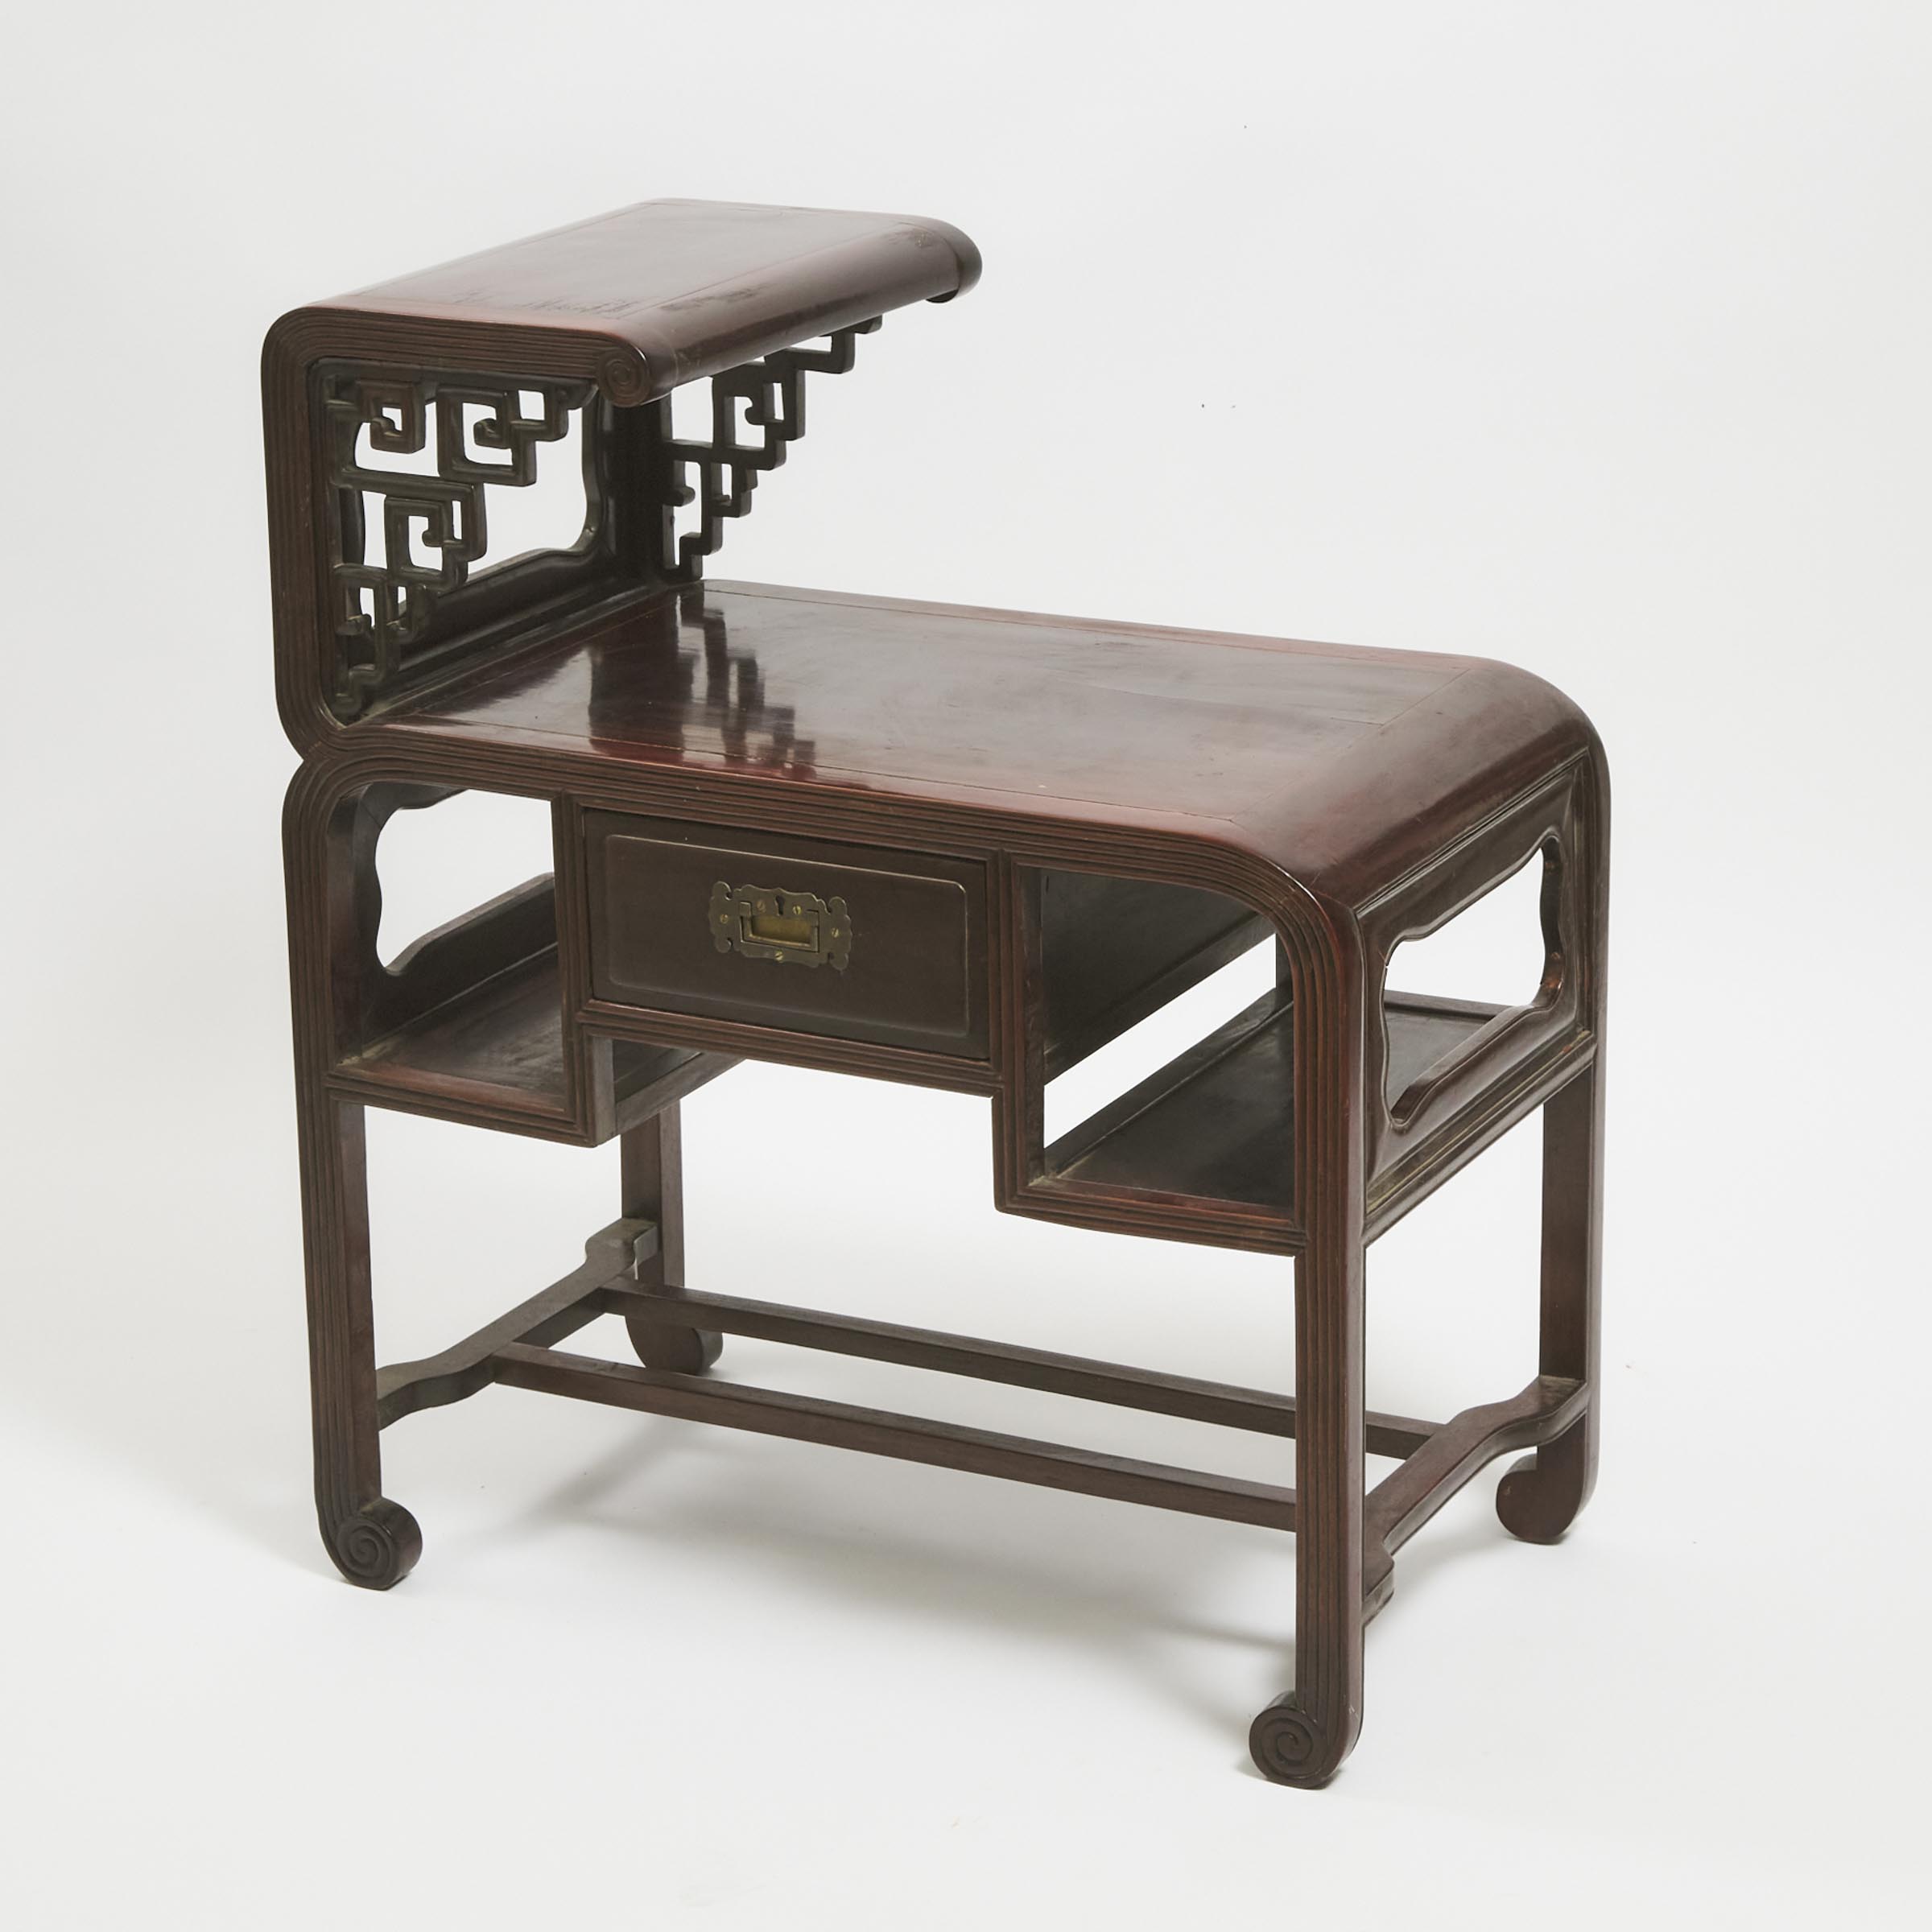 A Chinese Hardwood Two-Tier Low Table With Drawer